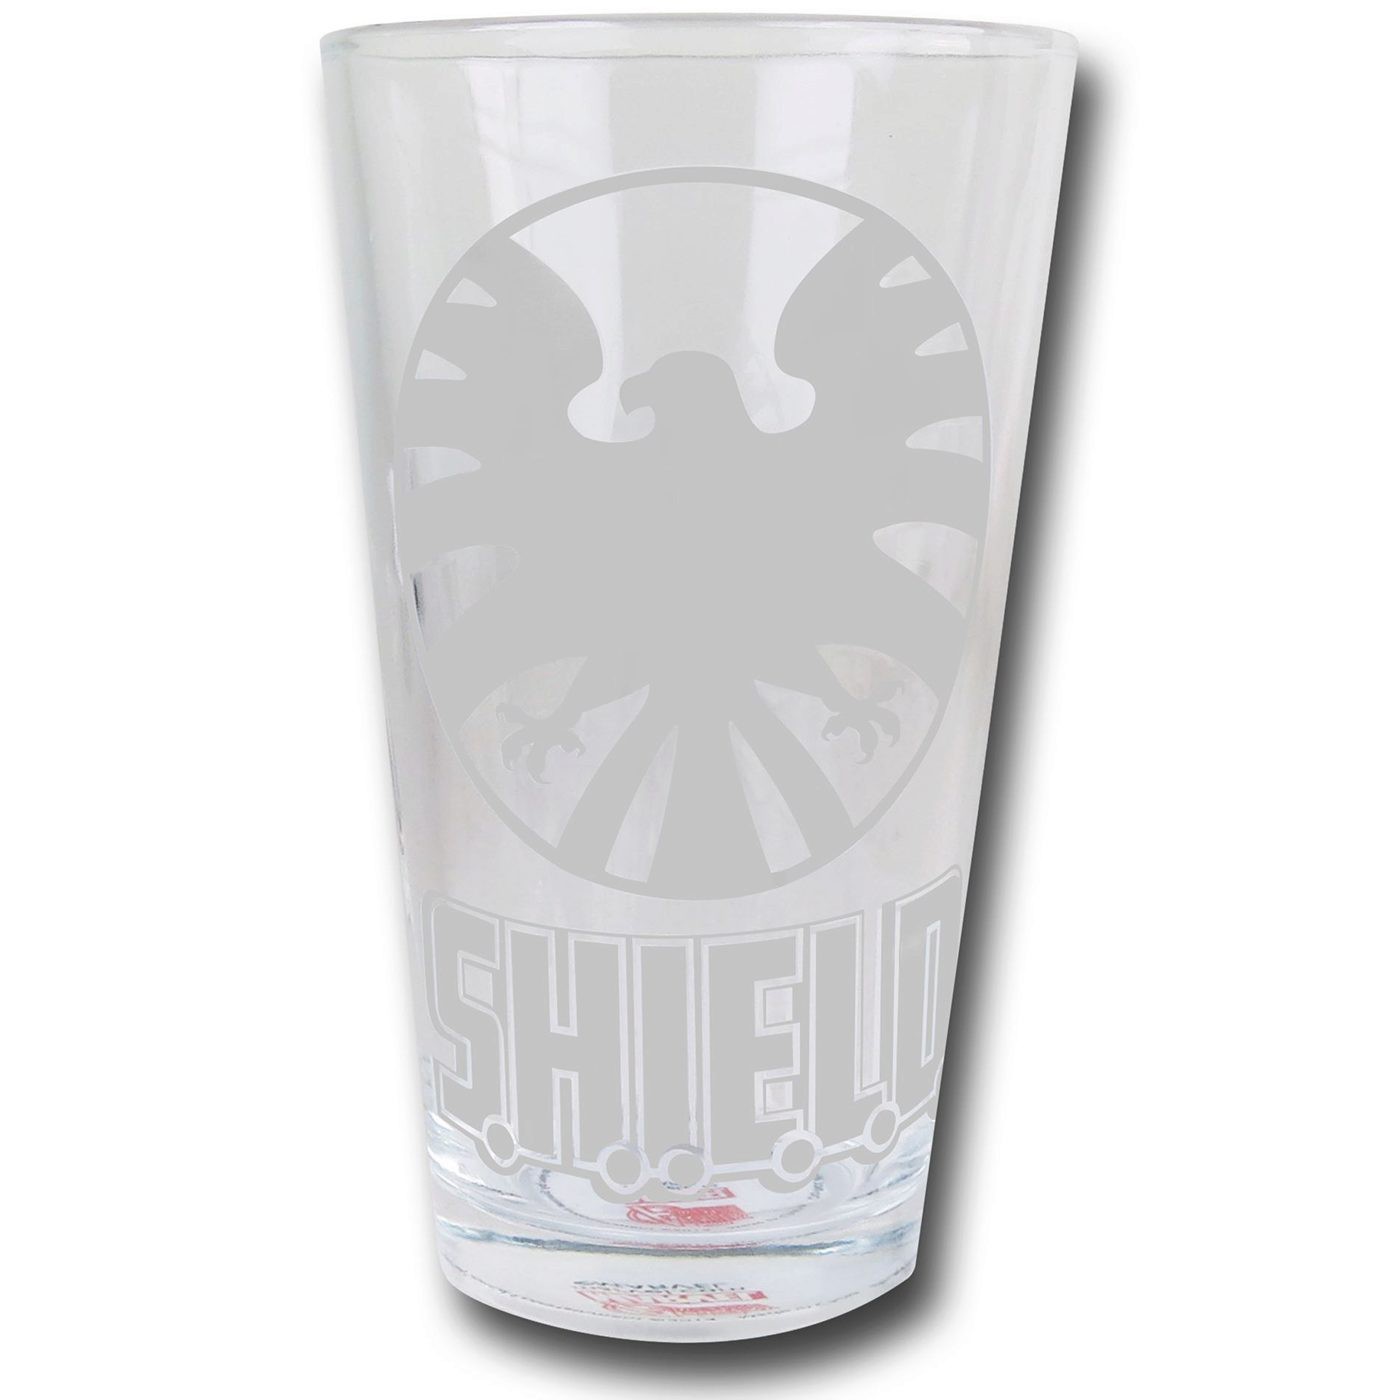 SHIELD Etched Print Pint Glass